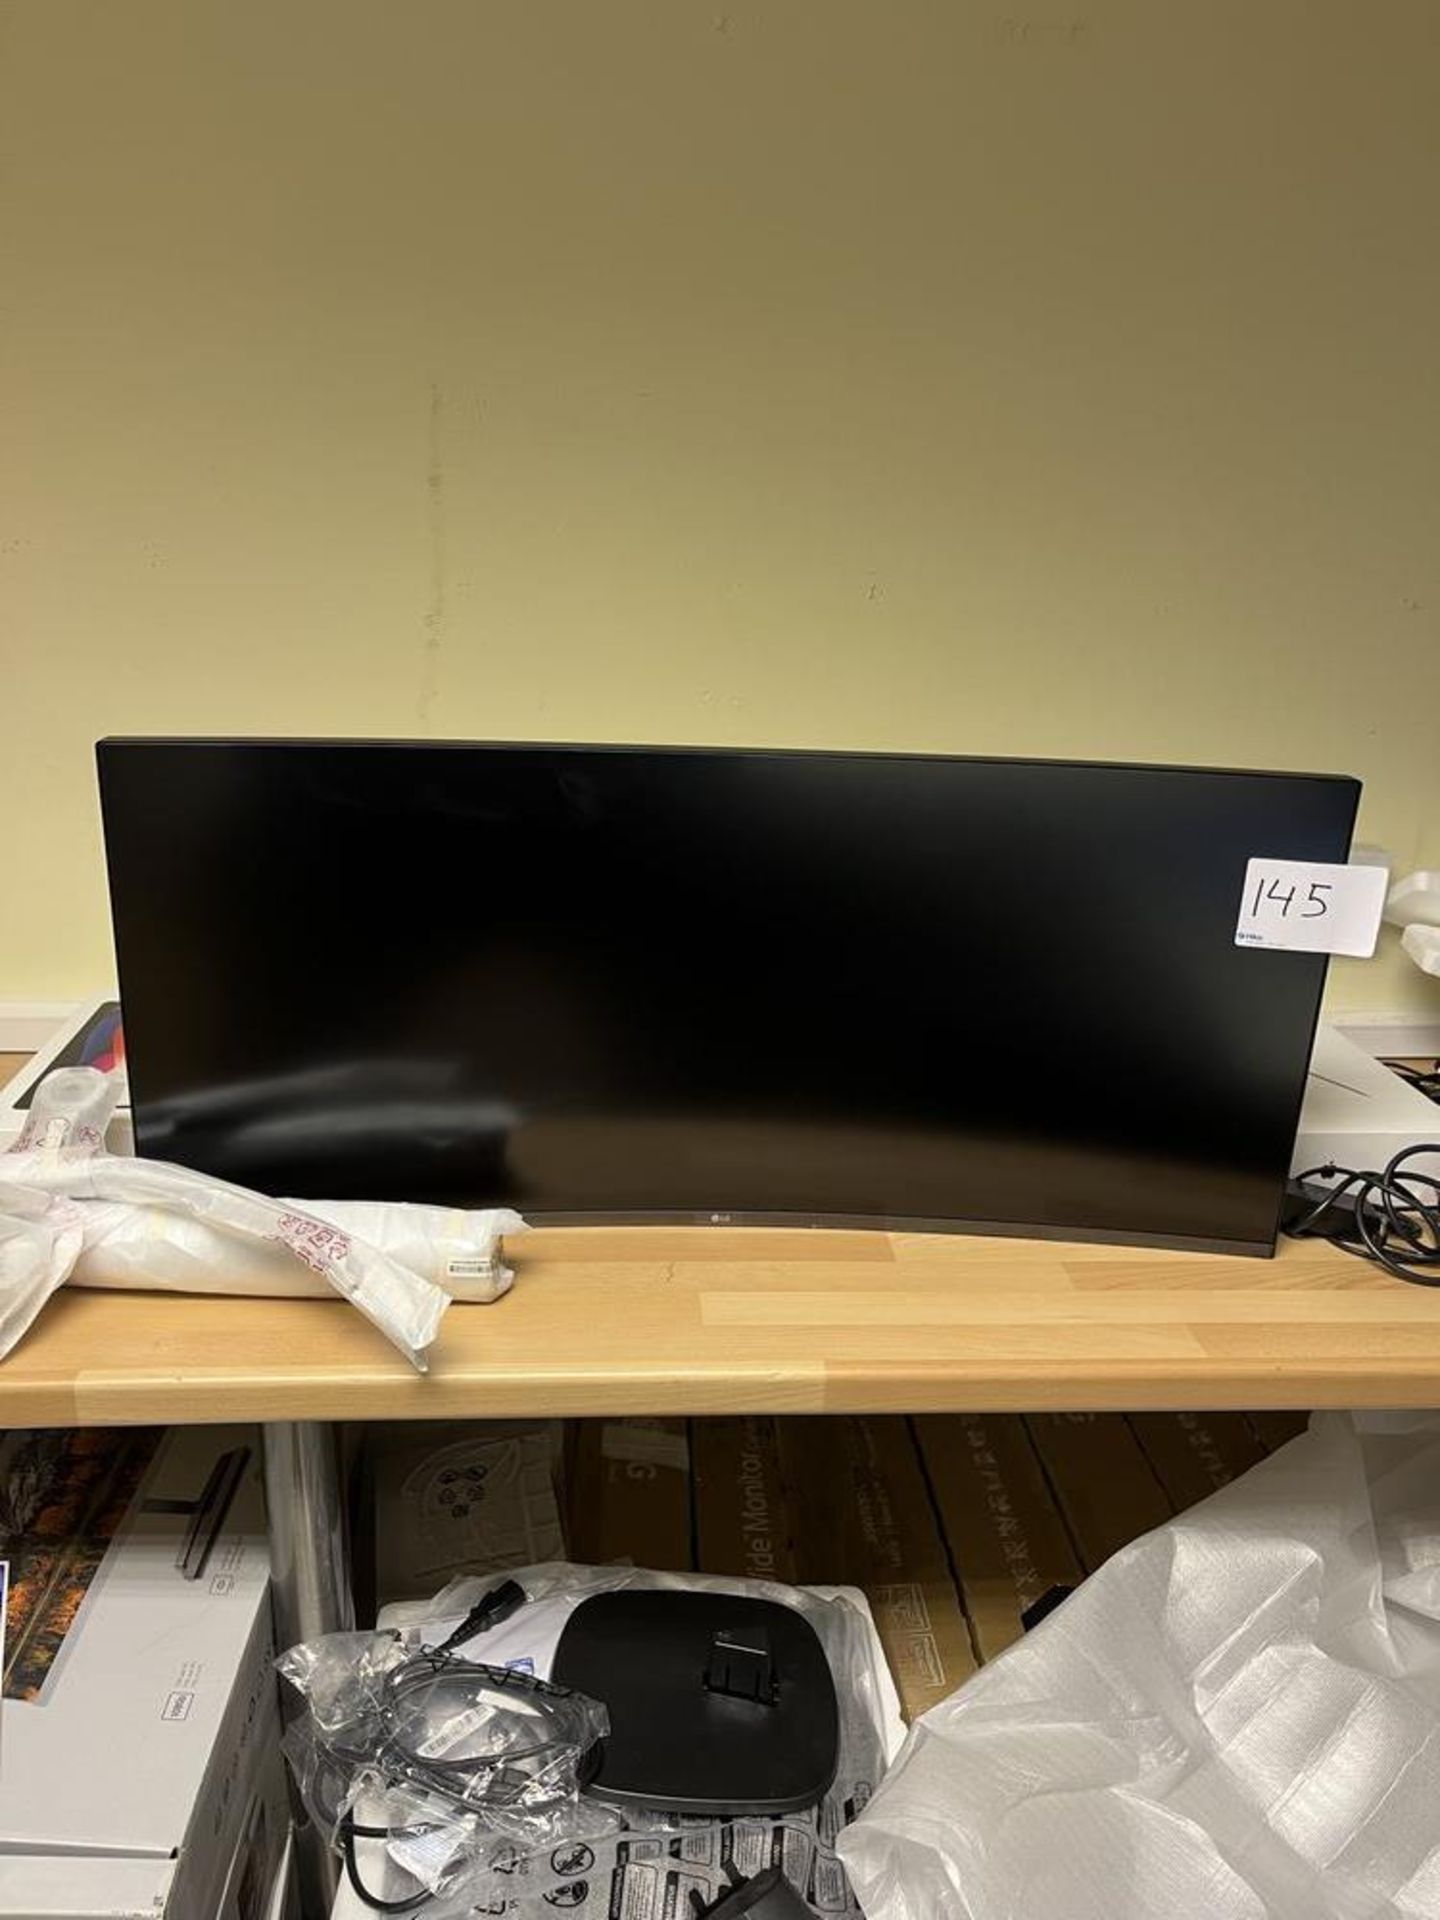 LG 38WN95C-W Curved Monitor With stand, no plugs, comes in box Serial Number 204NTBBK77701